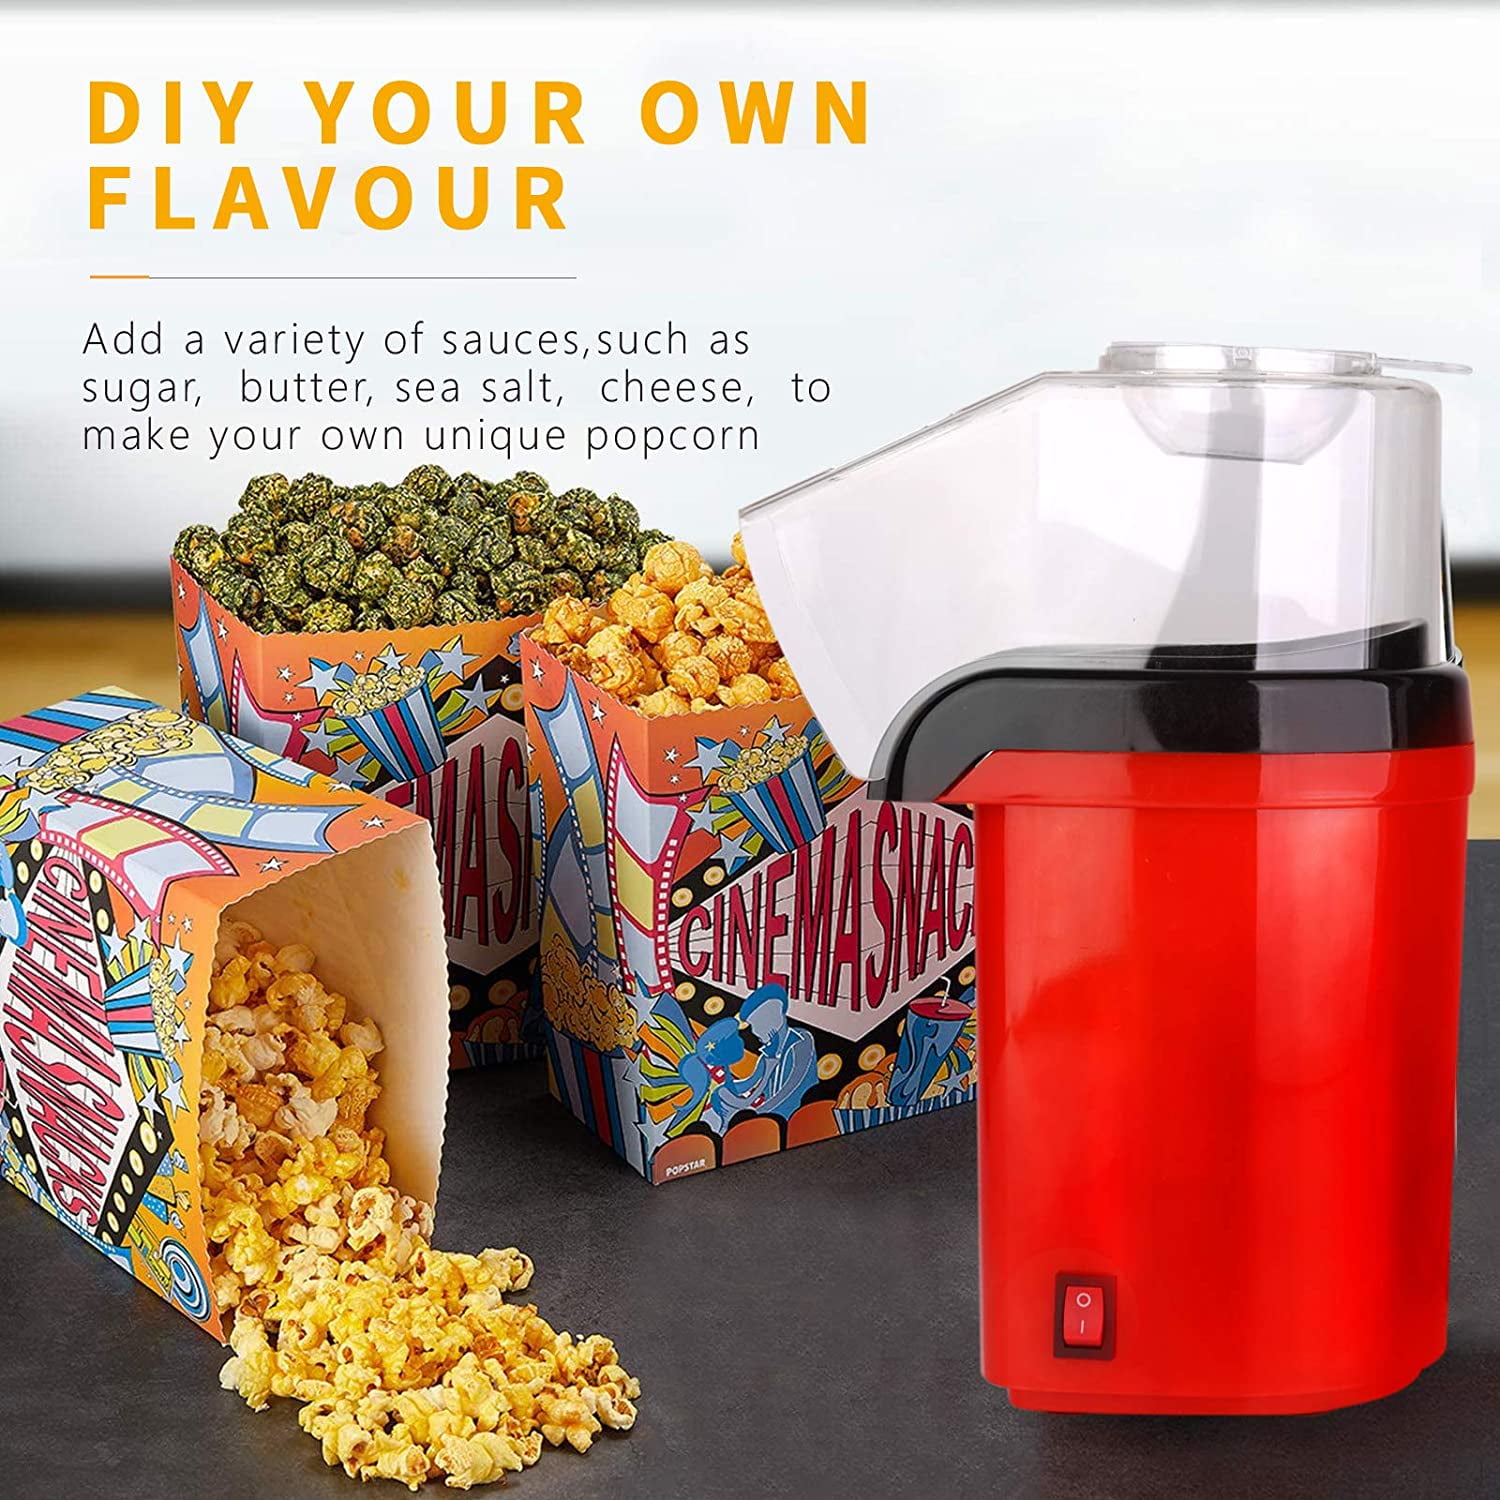 Ideal for Modern Home Kitchens Oil-Free 1200W Fast Popcorn Machine/Hot Air Popcorn Popper with Wide Mouth Design 